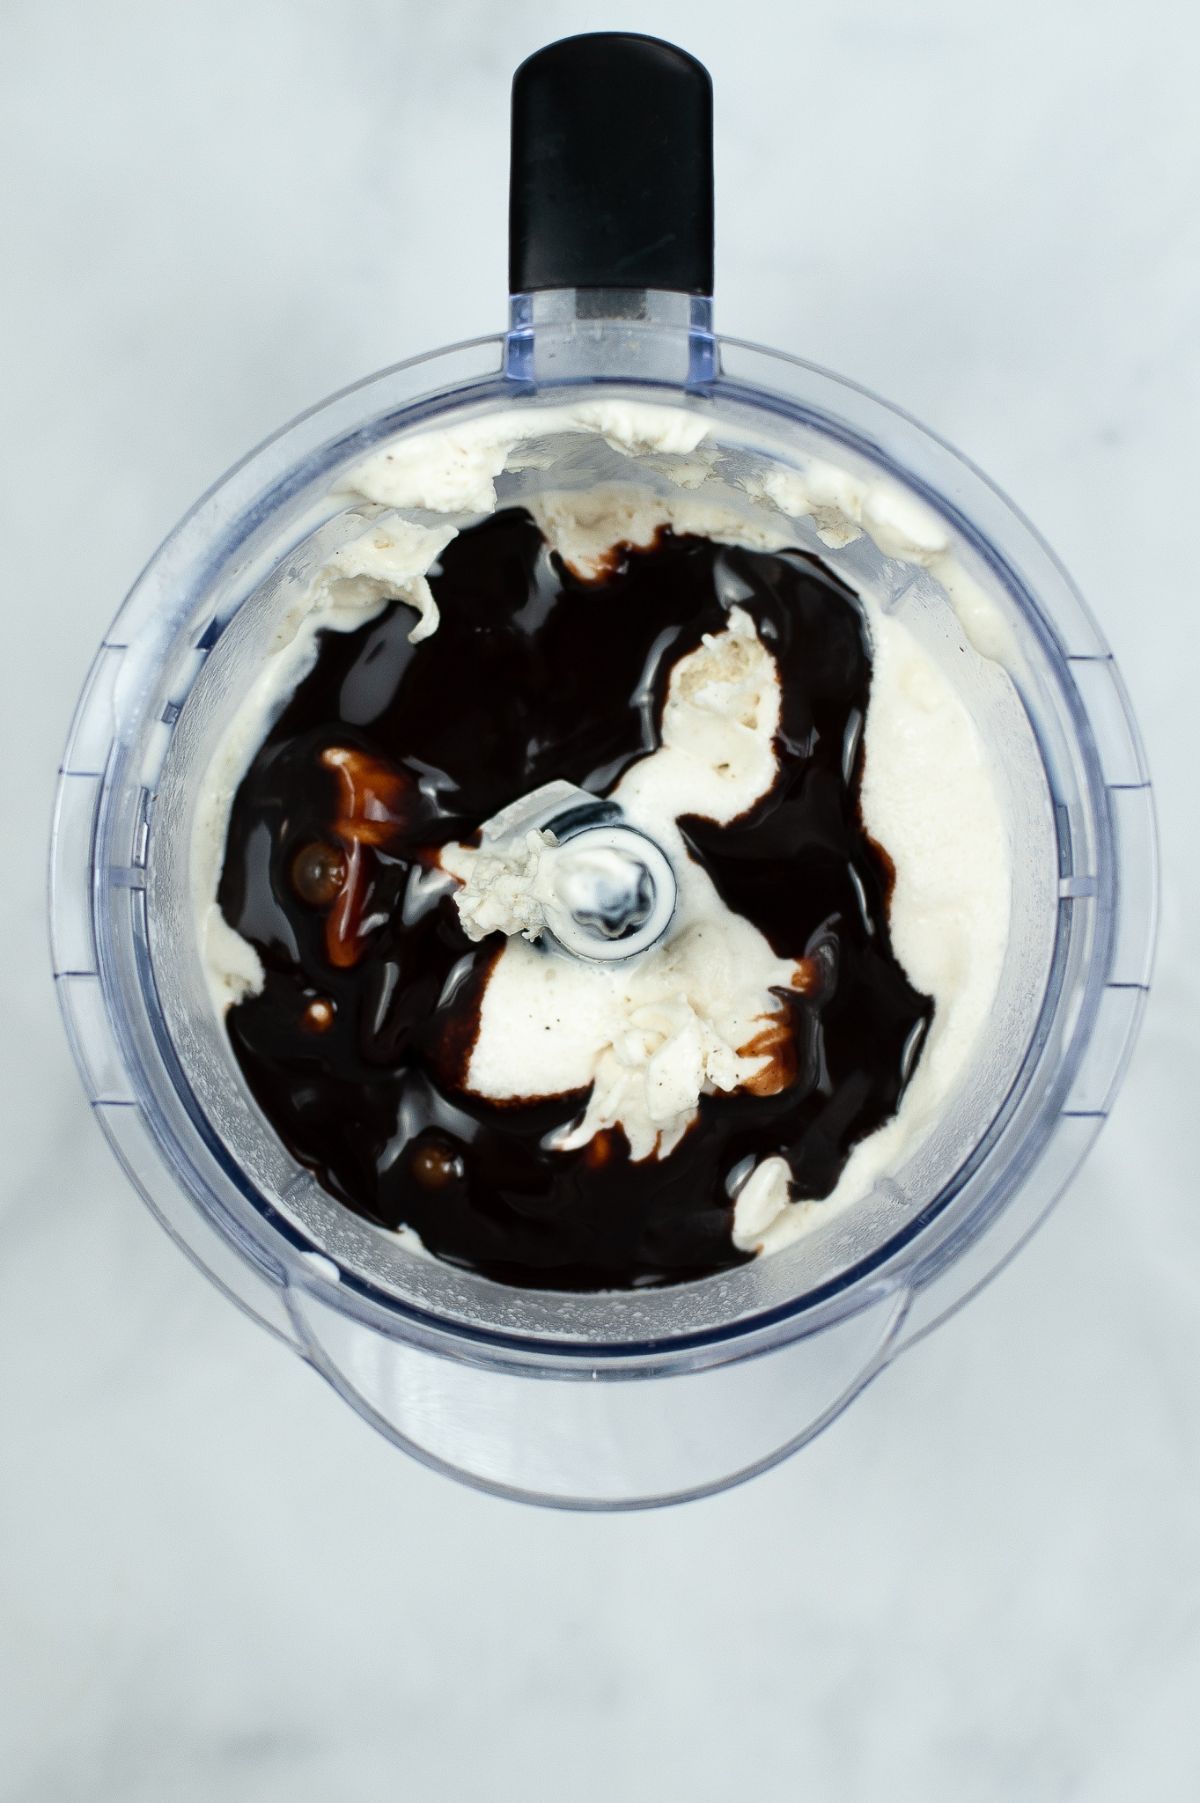 Ice cream and chocolate syrup added into the mixture in the blender.